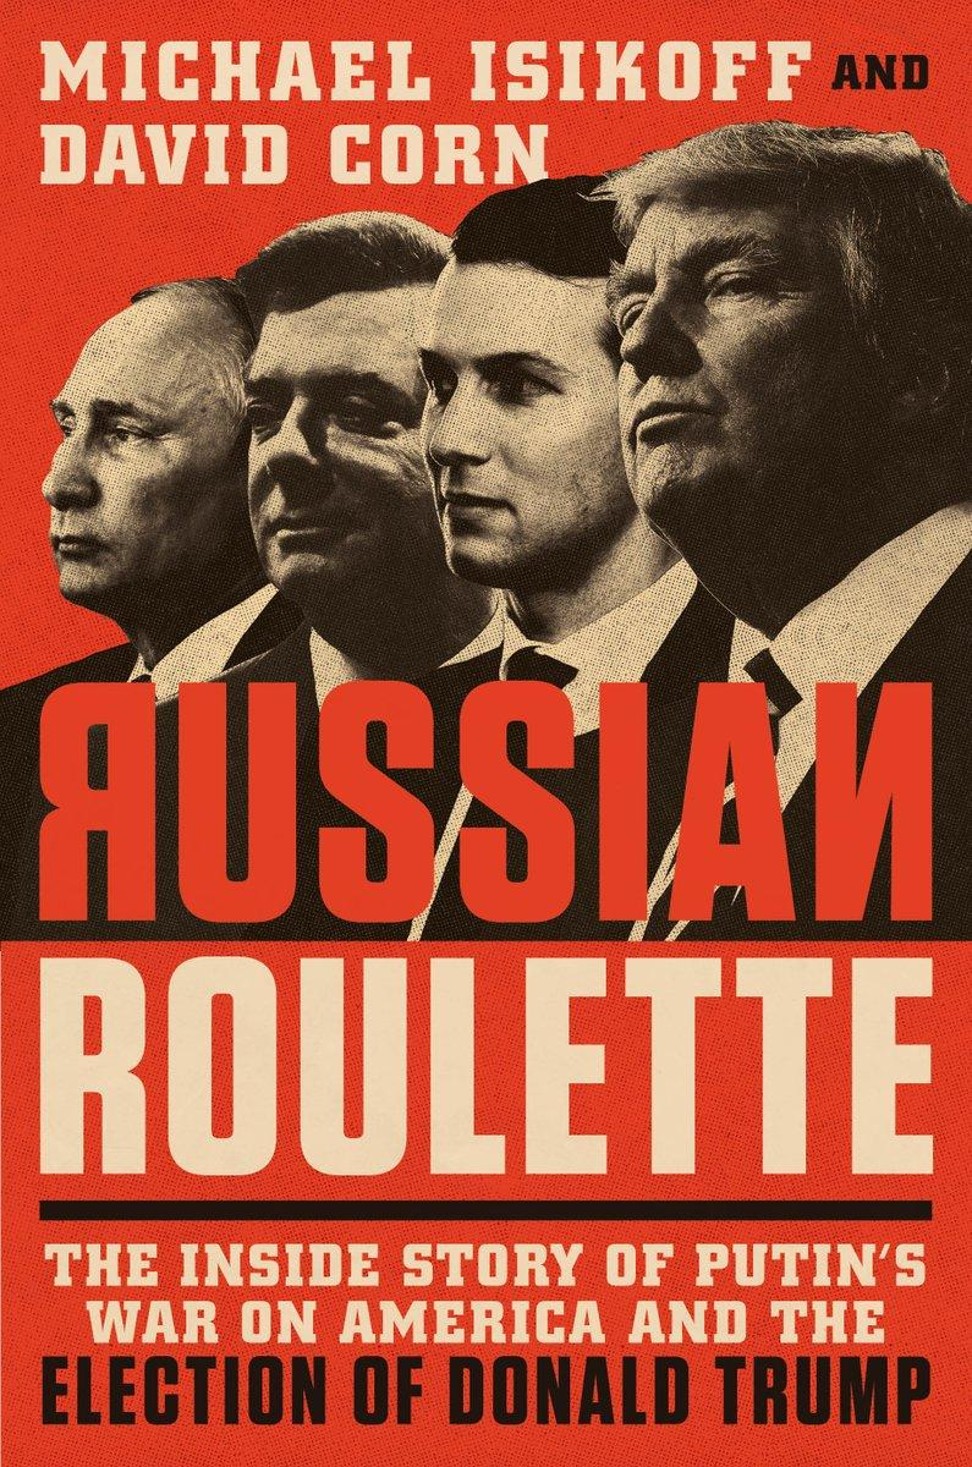 Russian Roulette by Michael Isikoff and David Corn.